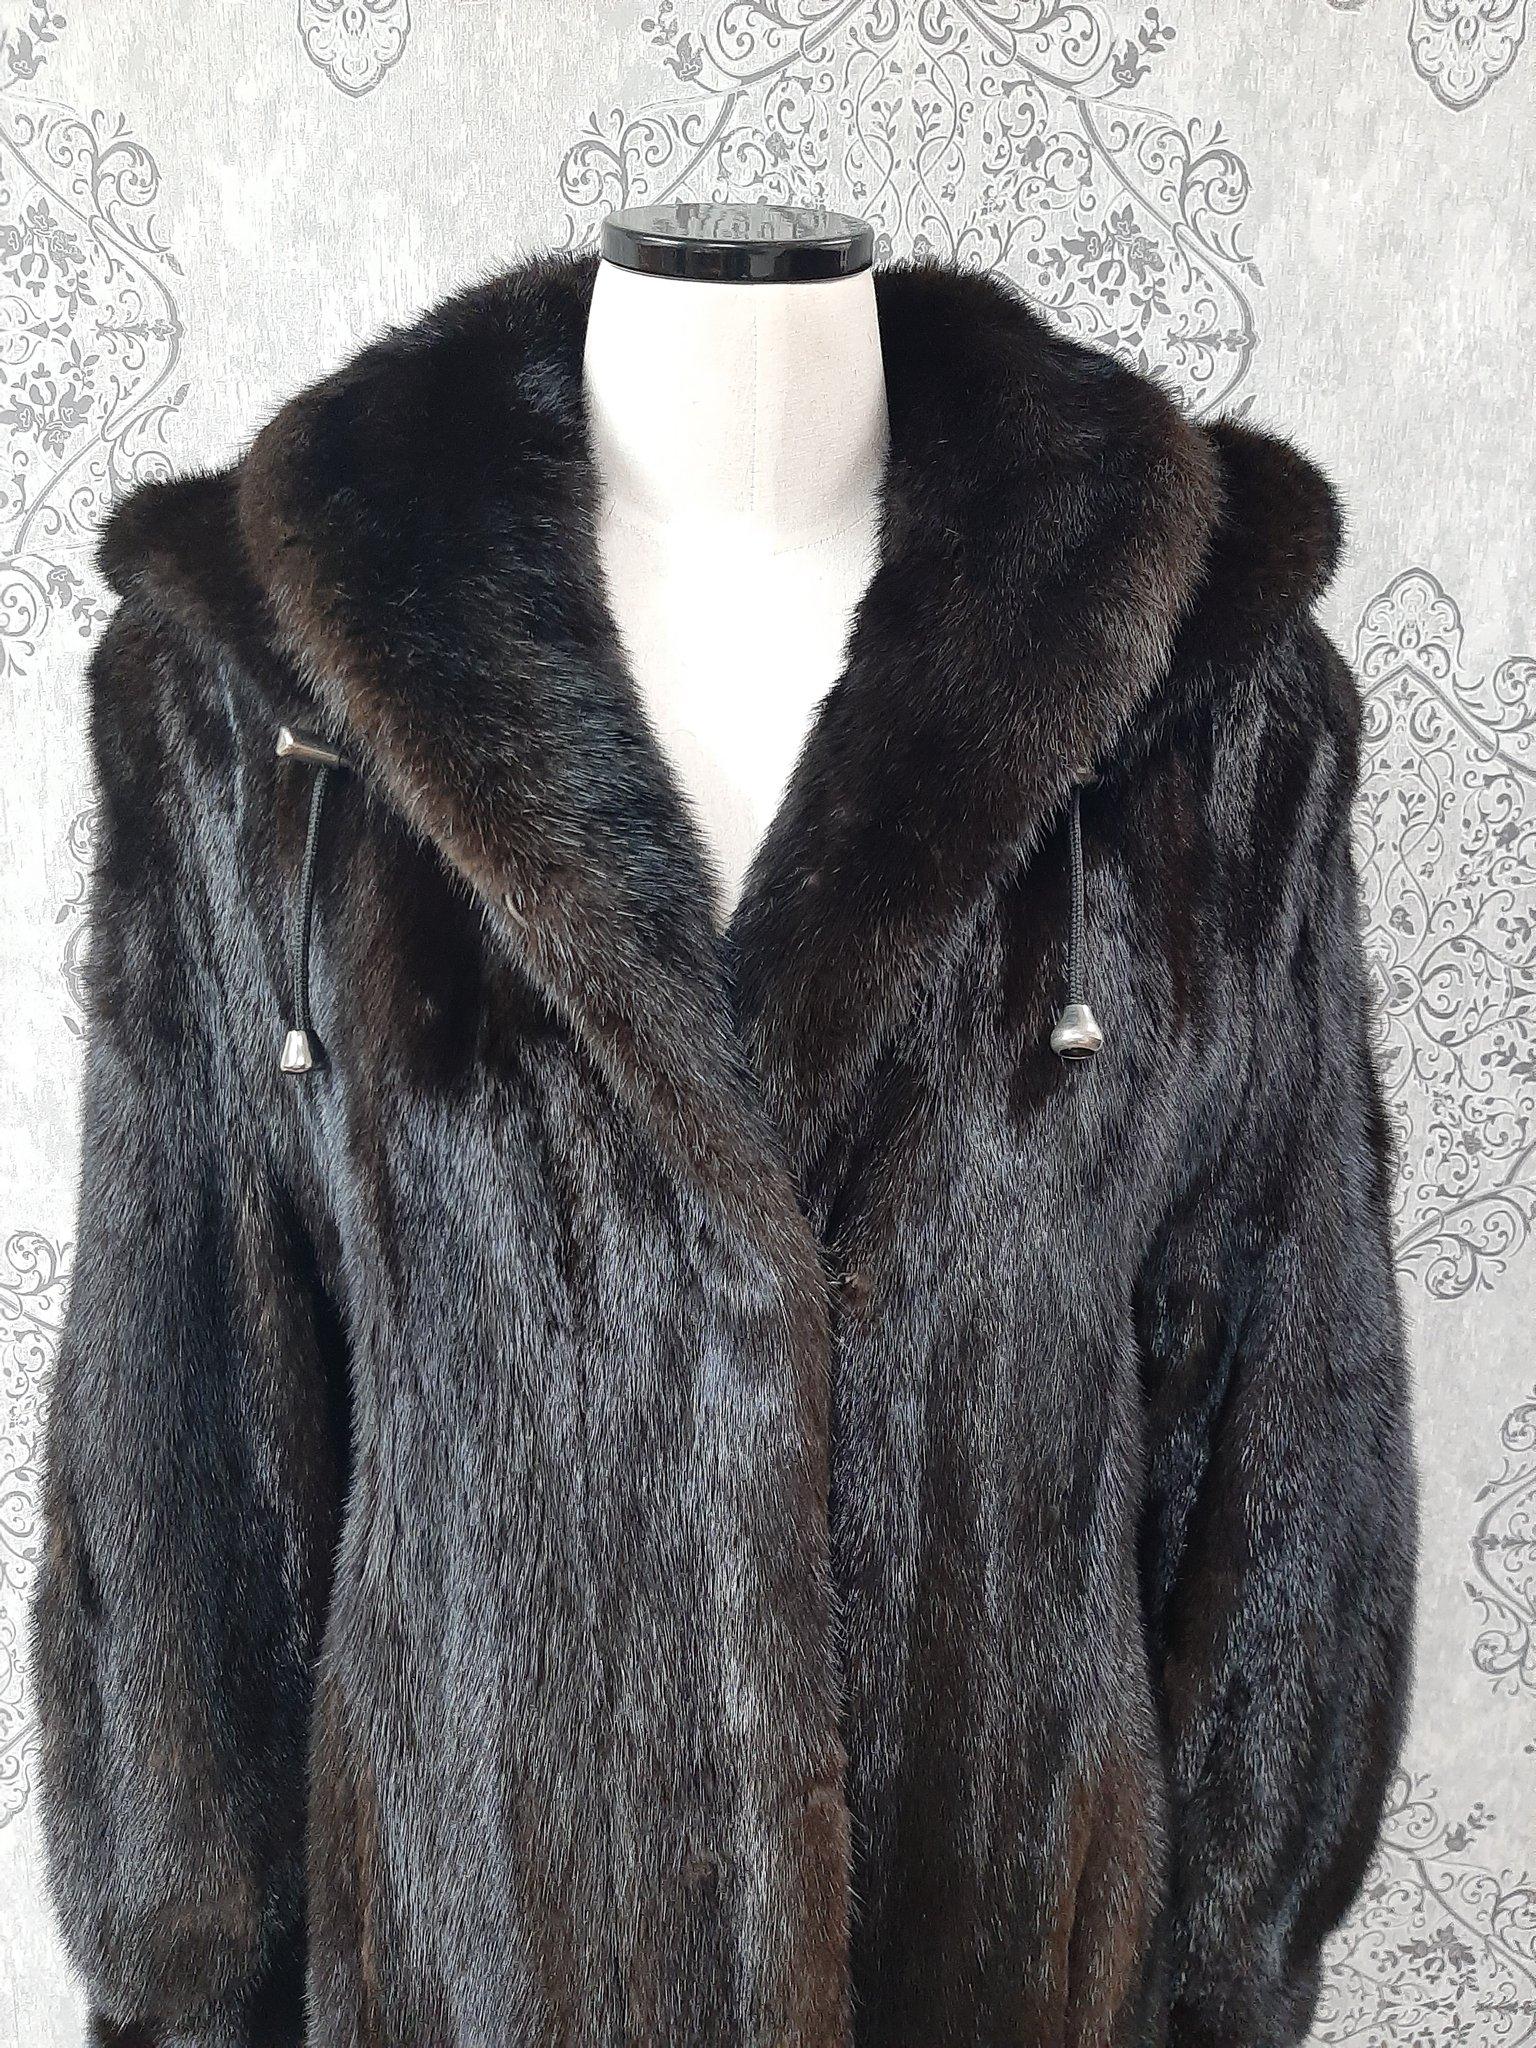 PRODUCT DESCRIPTION:

Brand new luxurious Mink fur coat with a hood

Condition: Brand New

Closure: Buttons

Color: Brown

Material: Mink

Garment type: Coat

Sleeves: straight

Pockets: two pockets

Collar: Short collar

Lining: Shirred Silk